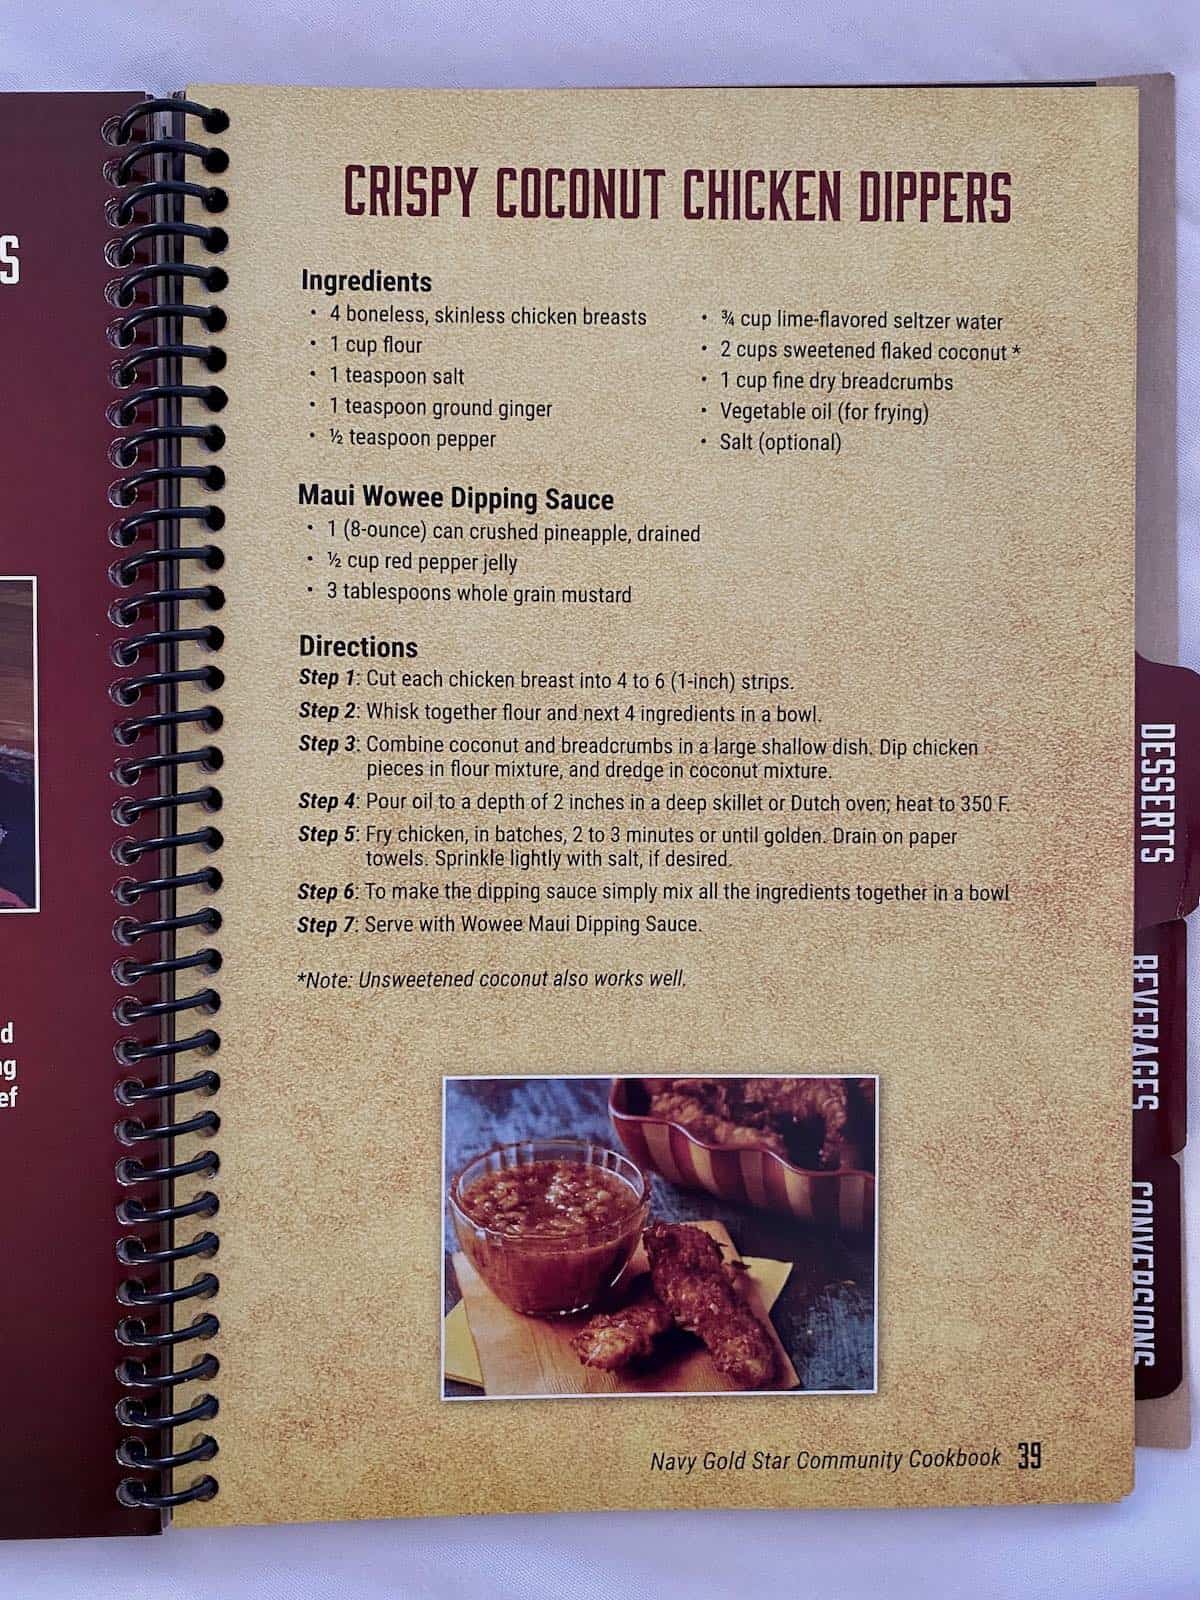 Recipe page in the cookbook for crispy coconut chicken dippers.